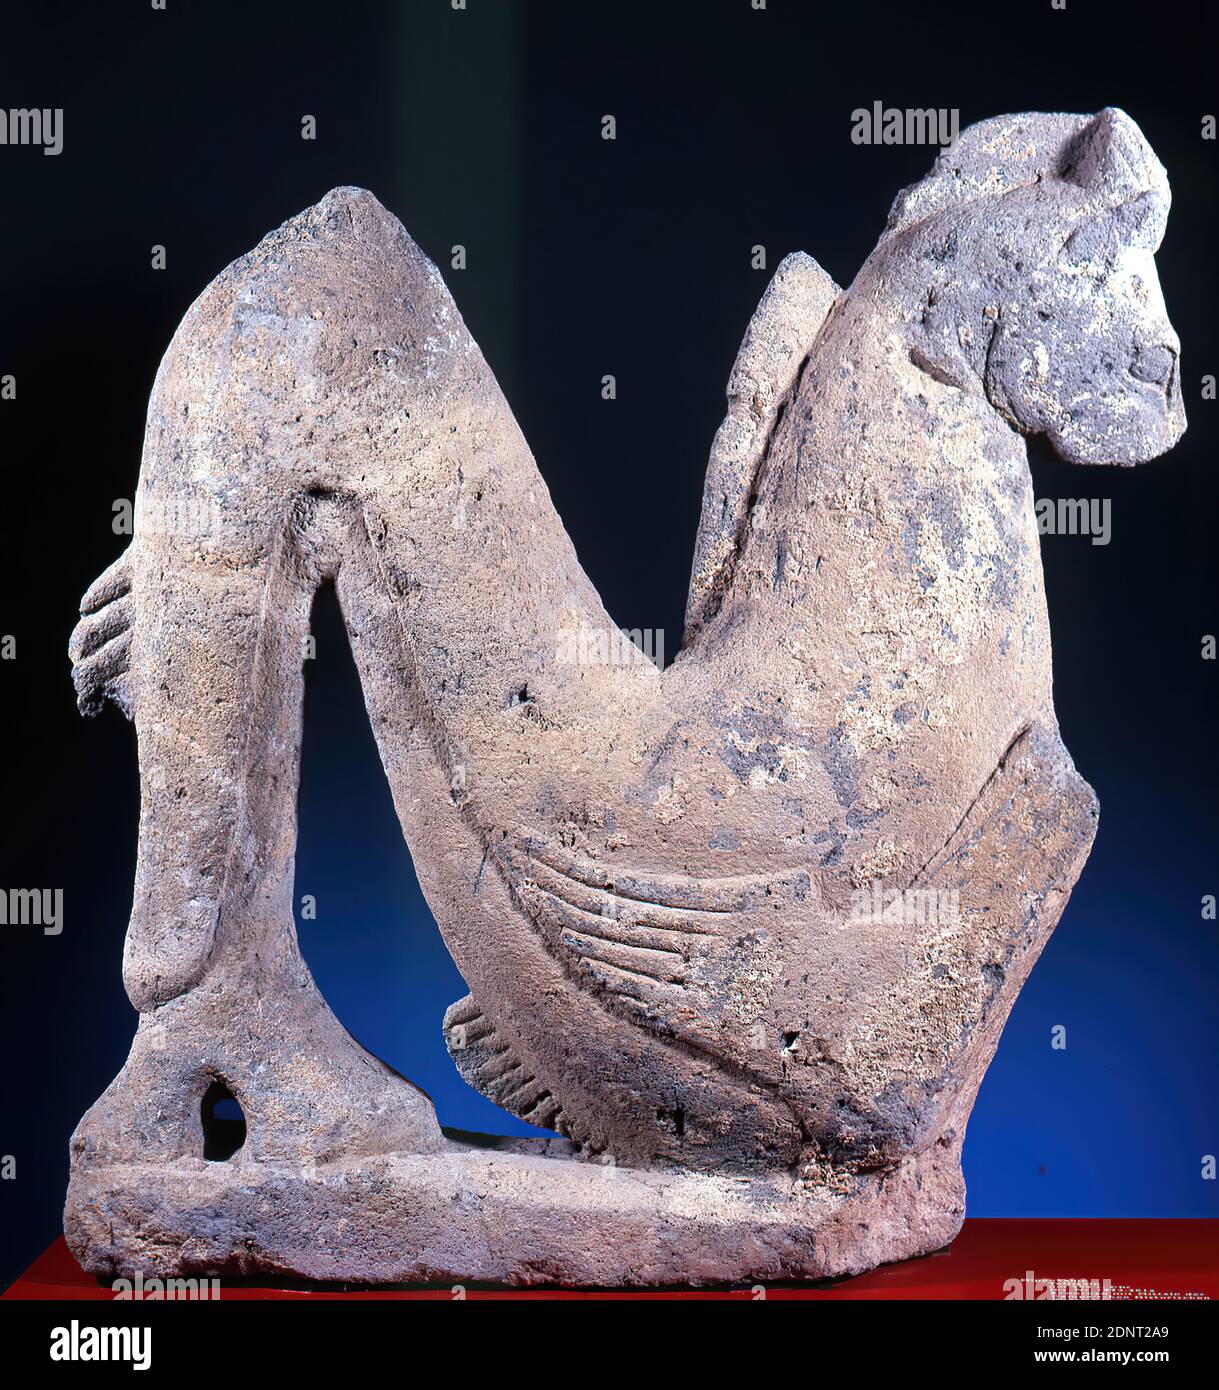 Hippokamp, Tuff, chiseled, Nenfro tuff, chiseled, Total: Height: 82.4 cm; Width: 82.5 cm; Depth: 17.5 cm, Sculptures, funerary monument, grave furnishings, late archaic, The term Hippokamp refers to a mythical creature that is half horse, half sea monster. The sculpture radiates a wild, unbridled dynamic and extreme tension. With the almost square format of the stone block, the artist has set limits into which the outline of the figure is set. At the sides, the erected tail and the lost front legs form the vertical conclusion. Stock Photo